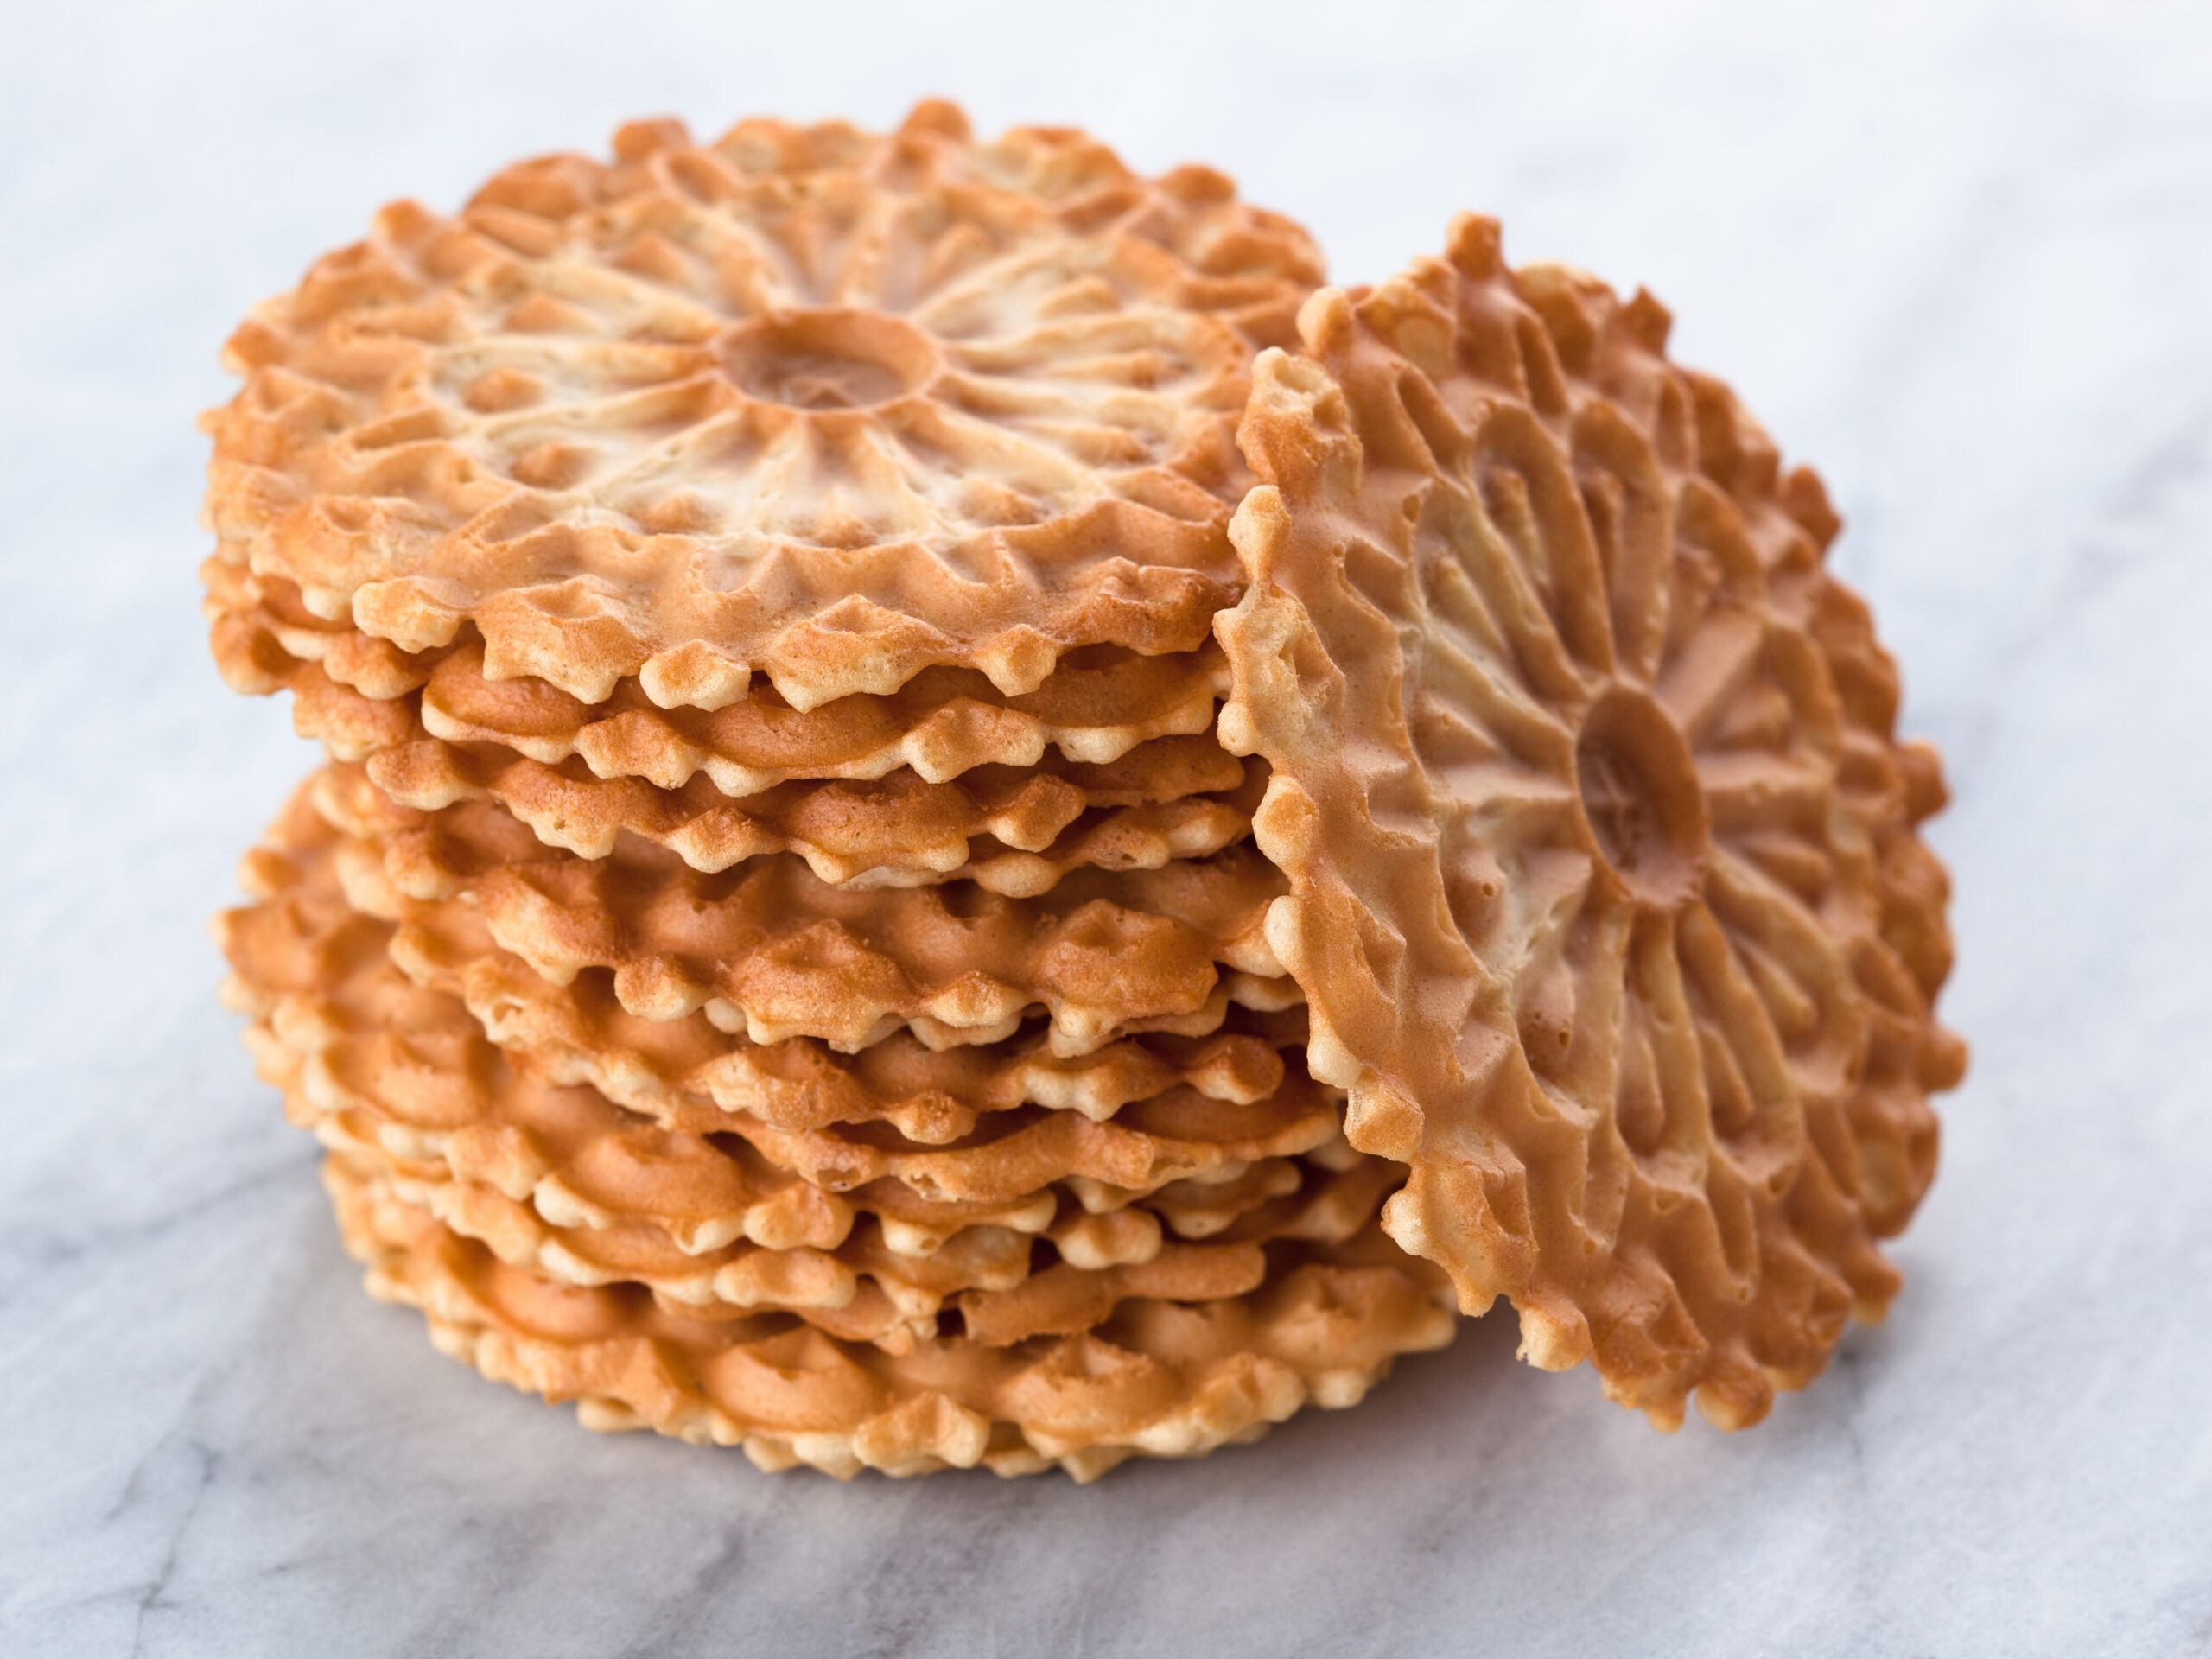 Studio photo of stack of traditional Italian cookies commonly called "pizzelles" on white marble